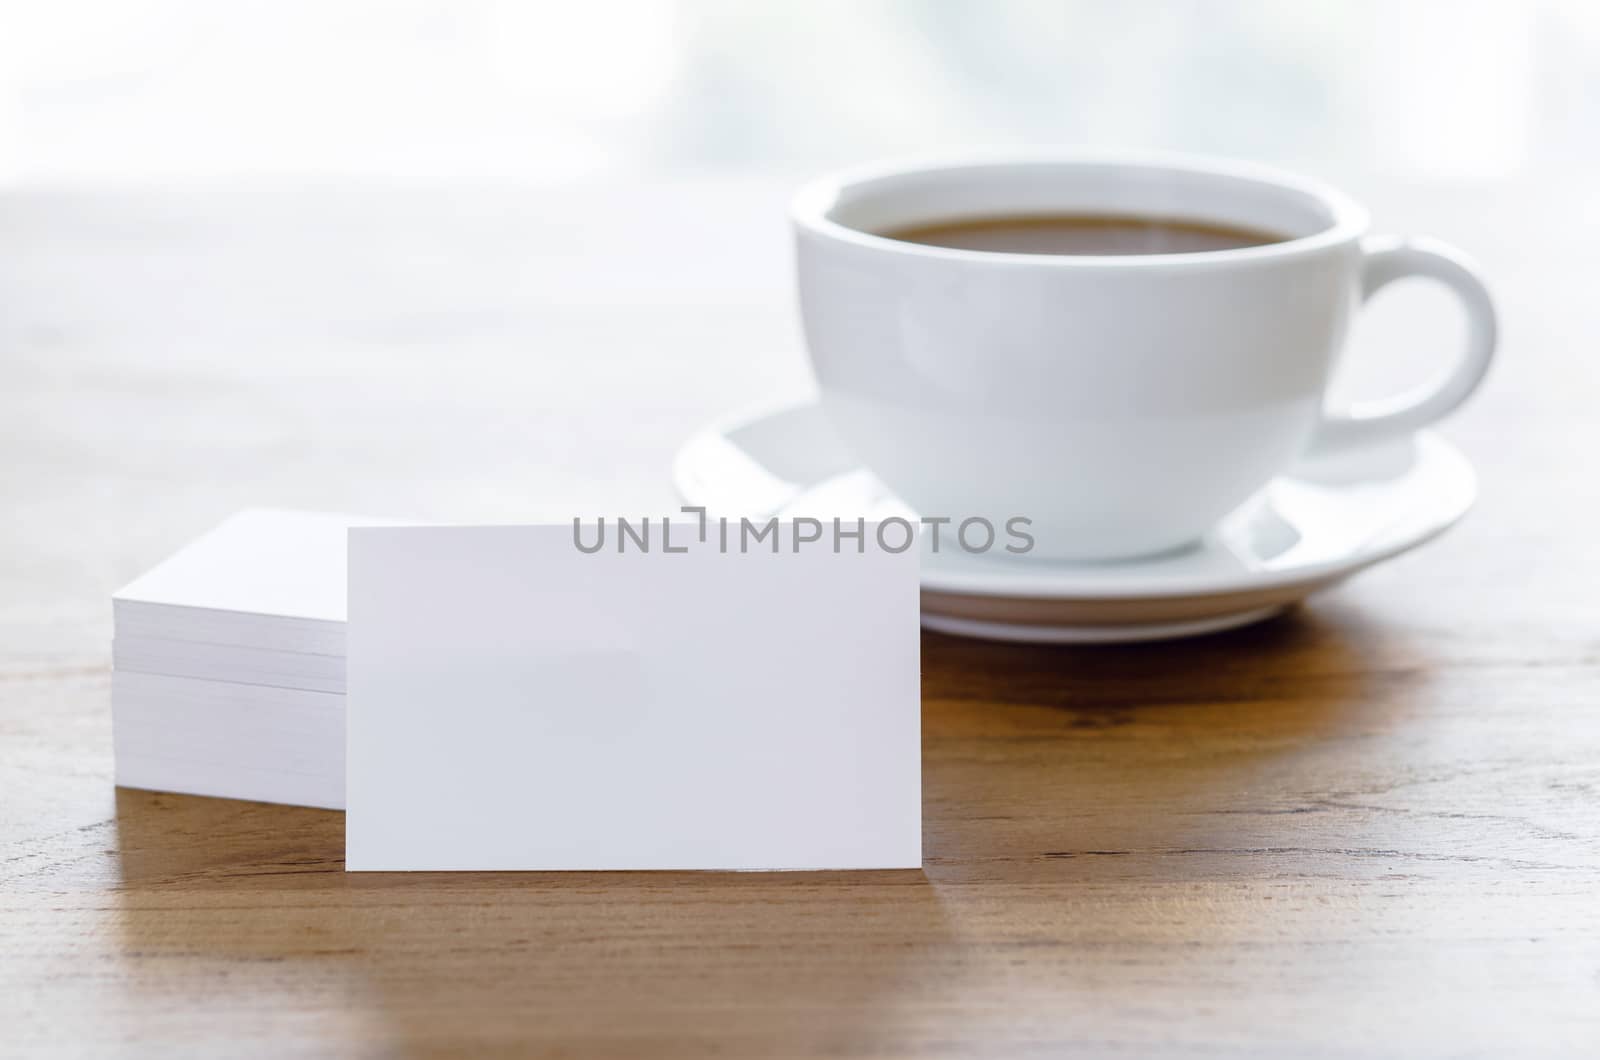 Blank business cards and cup of coffee on wooden table. by koson